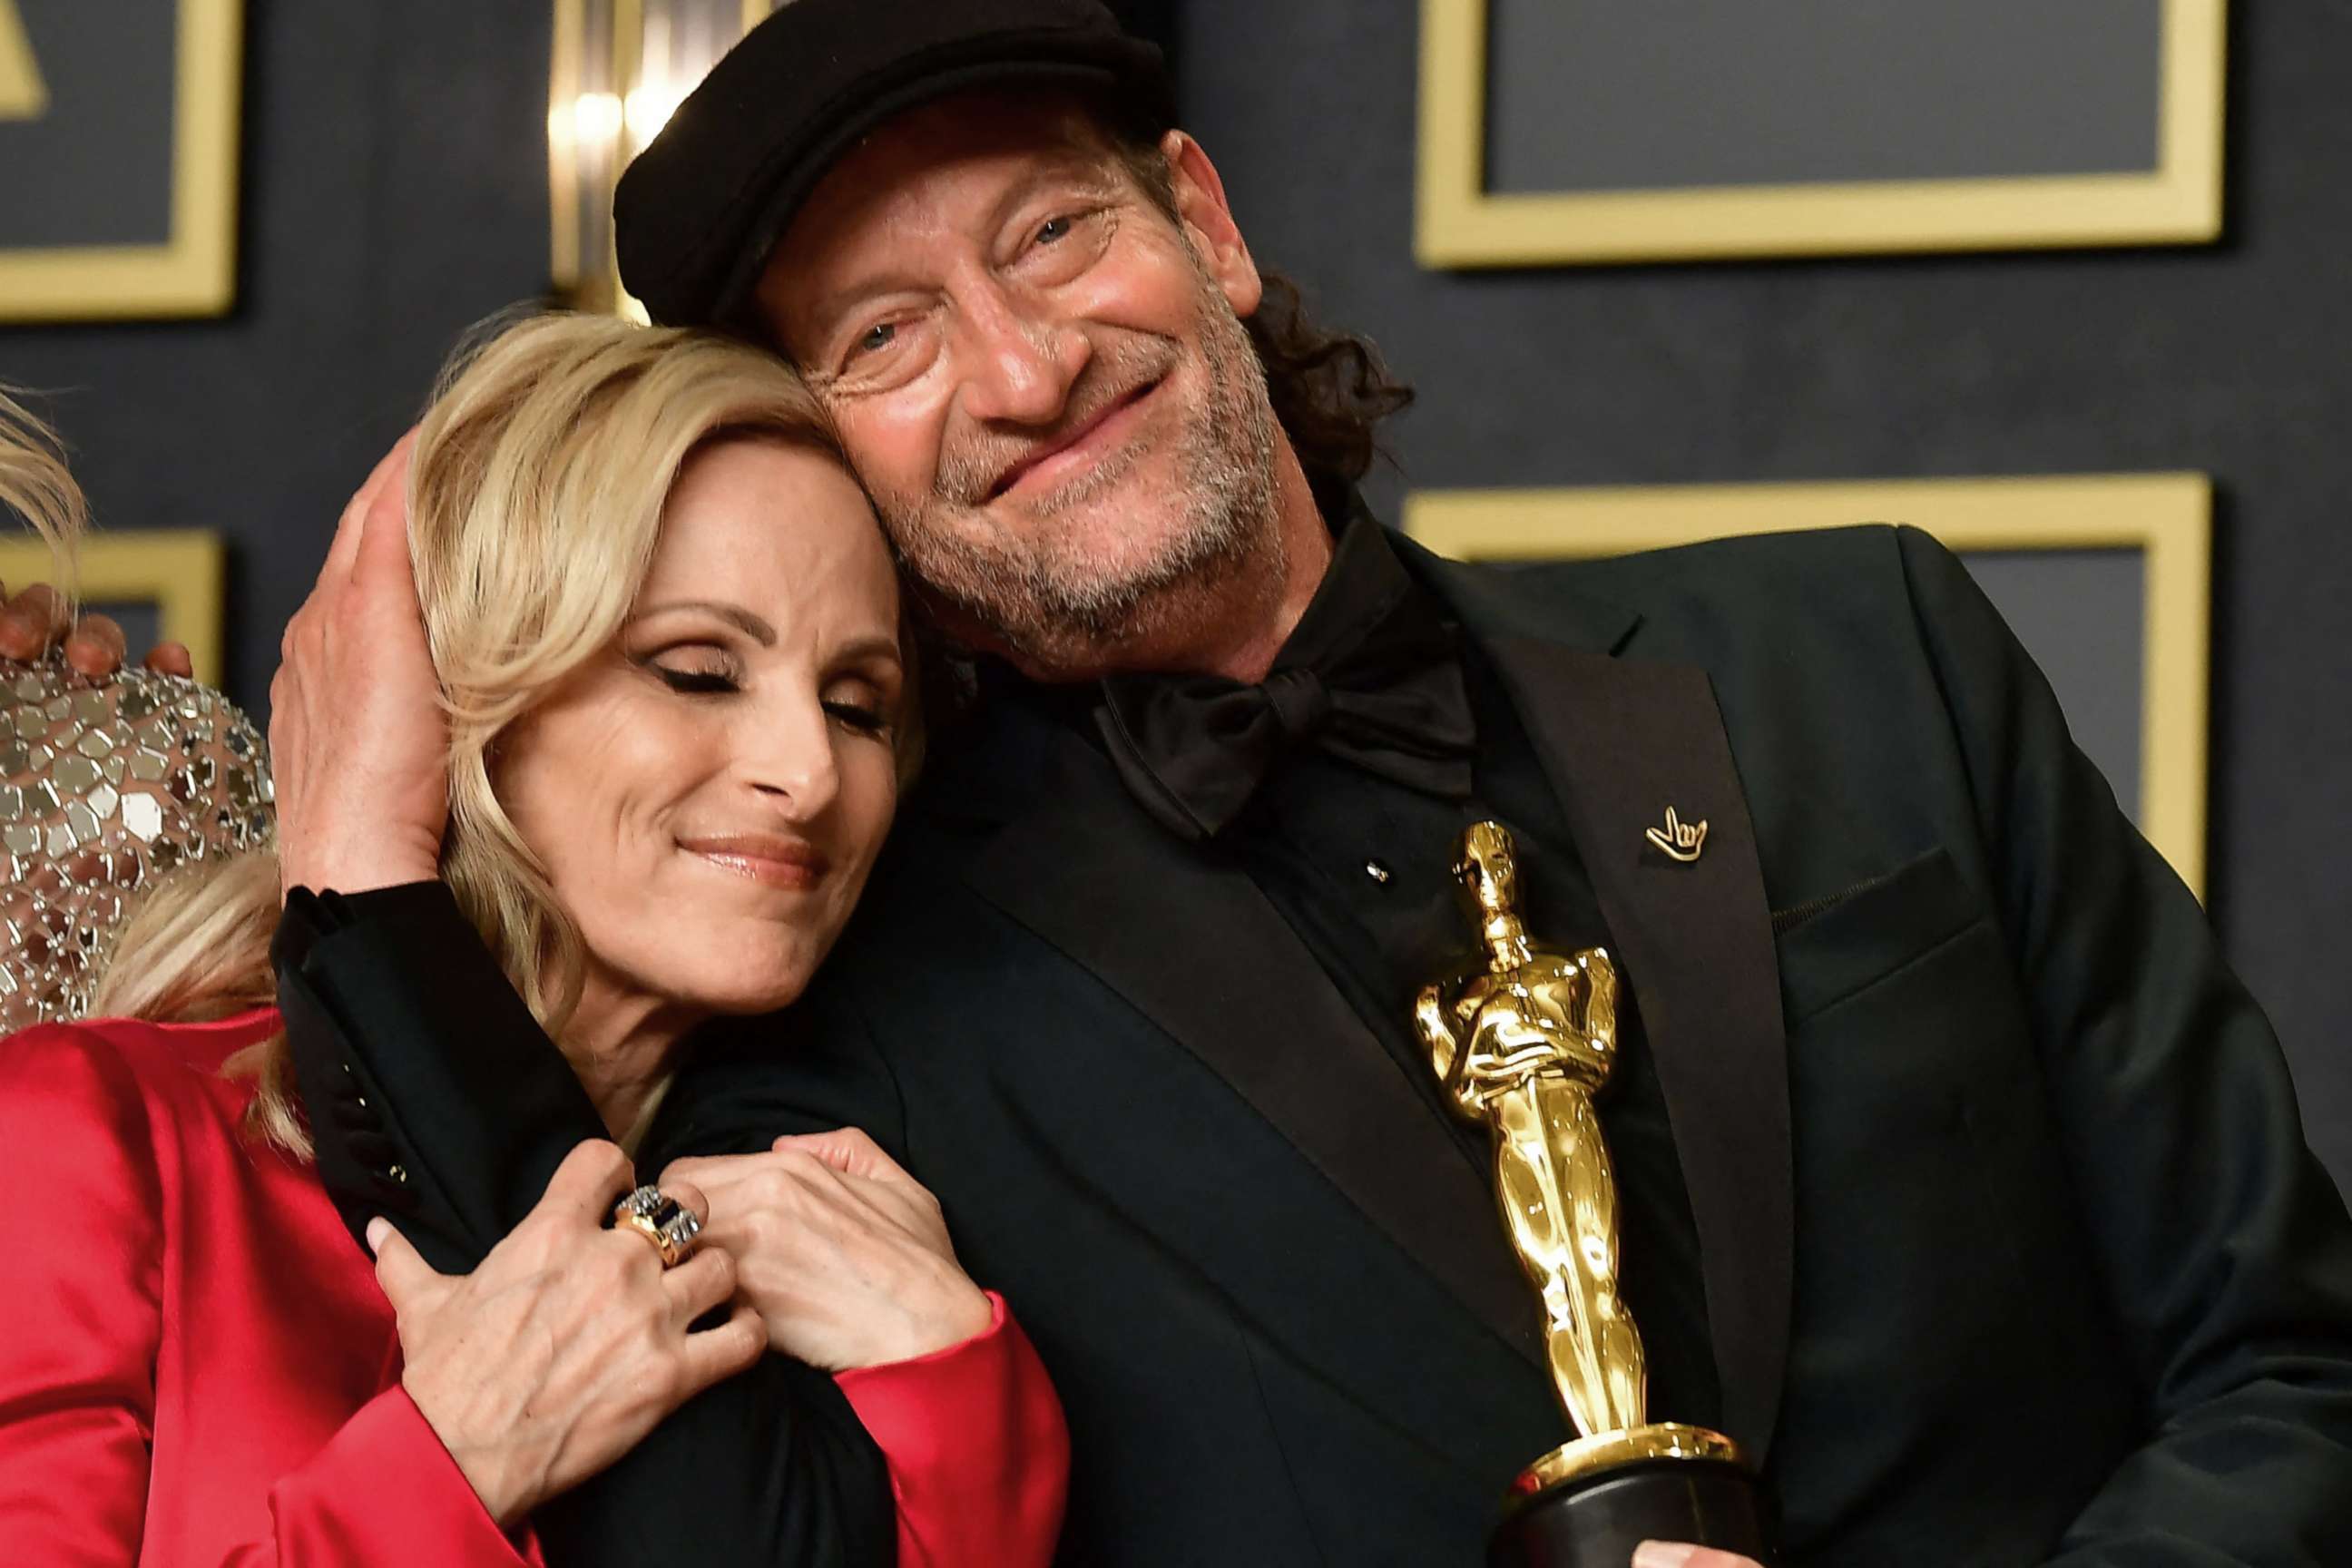 PHOTO: Actress Marlee Matlin and actor Troy Kotsur embrace as the cast of CODA, winner of Best Picture, gathers in the press room during the 94th Oscars at the Dolby Theatre in Hollywood, Calif., March 27, 2022.